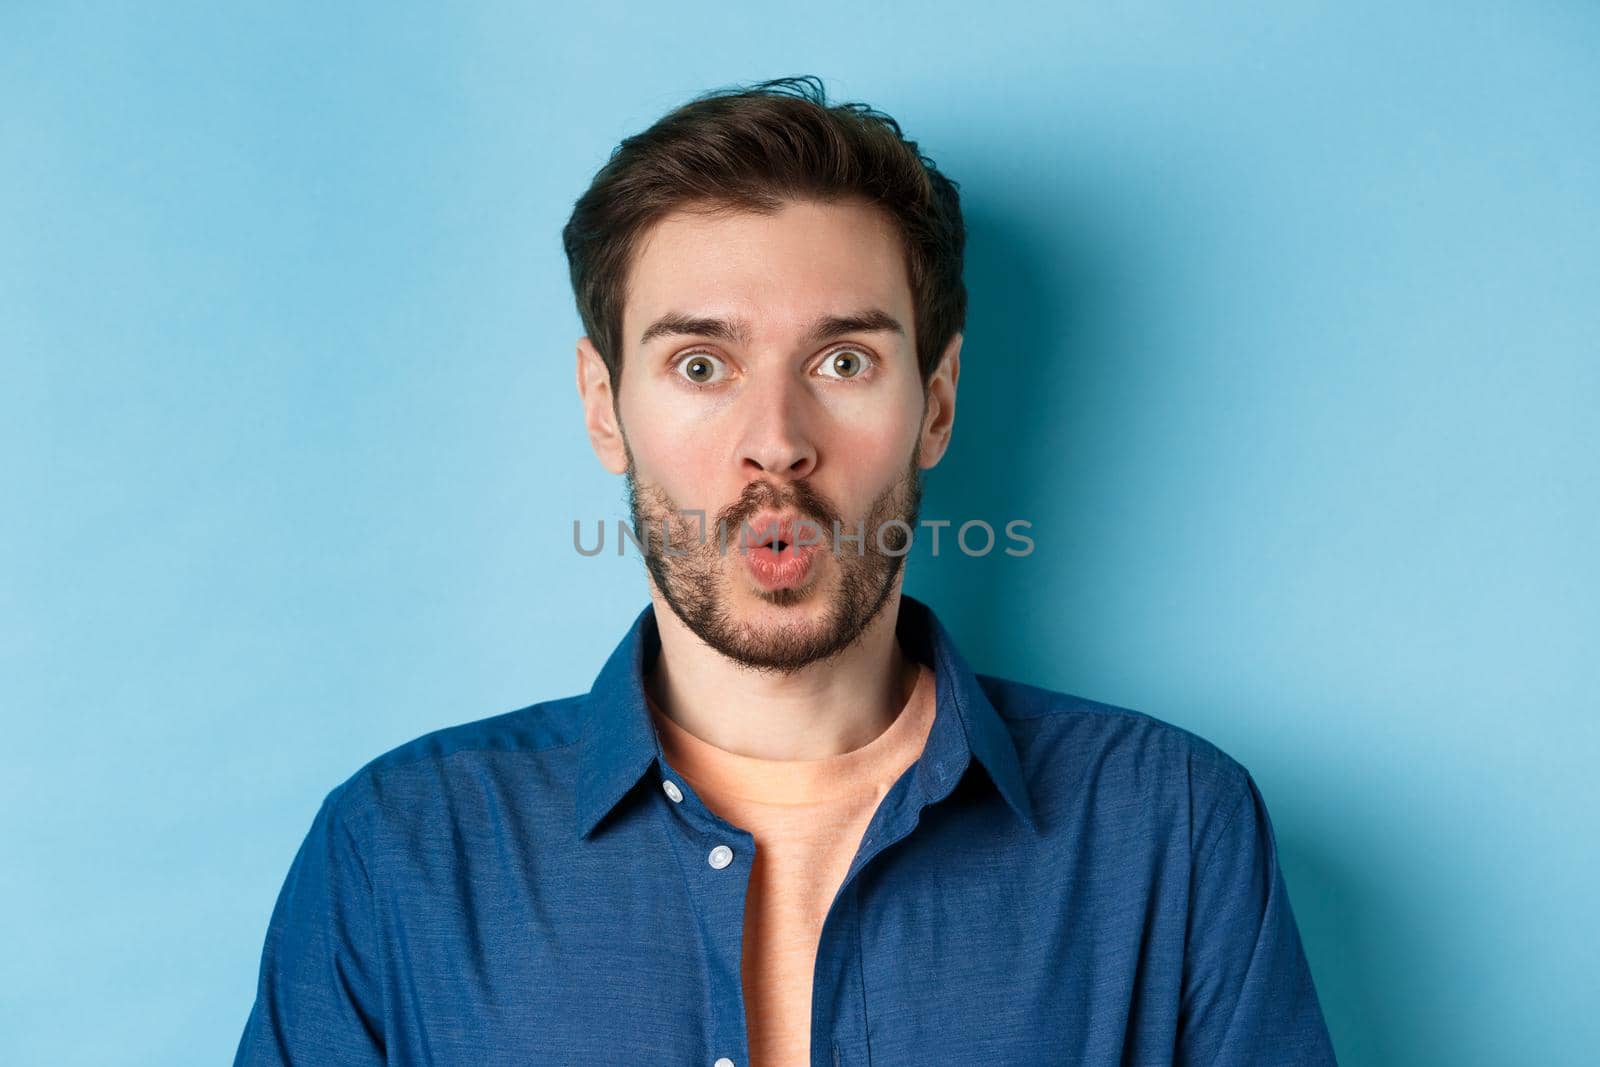 Close up portrait of amazed and surprised man saying wow, staring impressed at camera, checking out cool offer, standing on blue background.